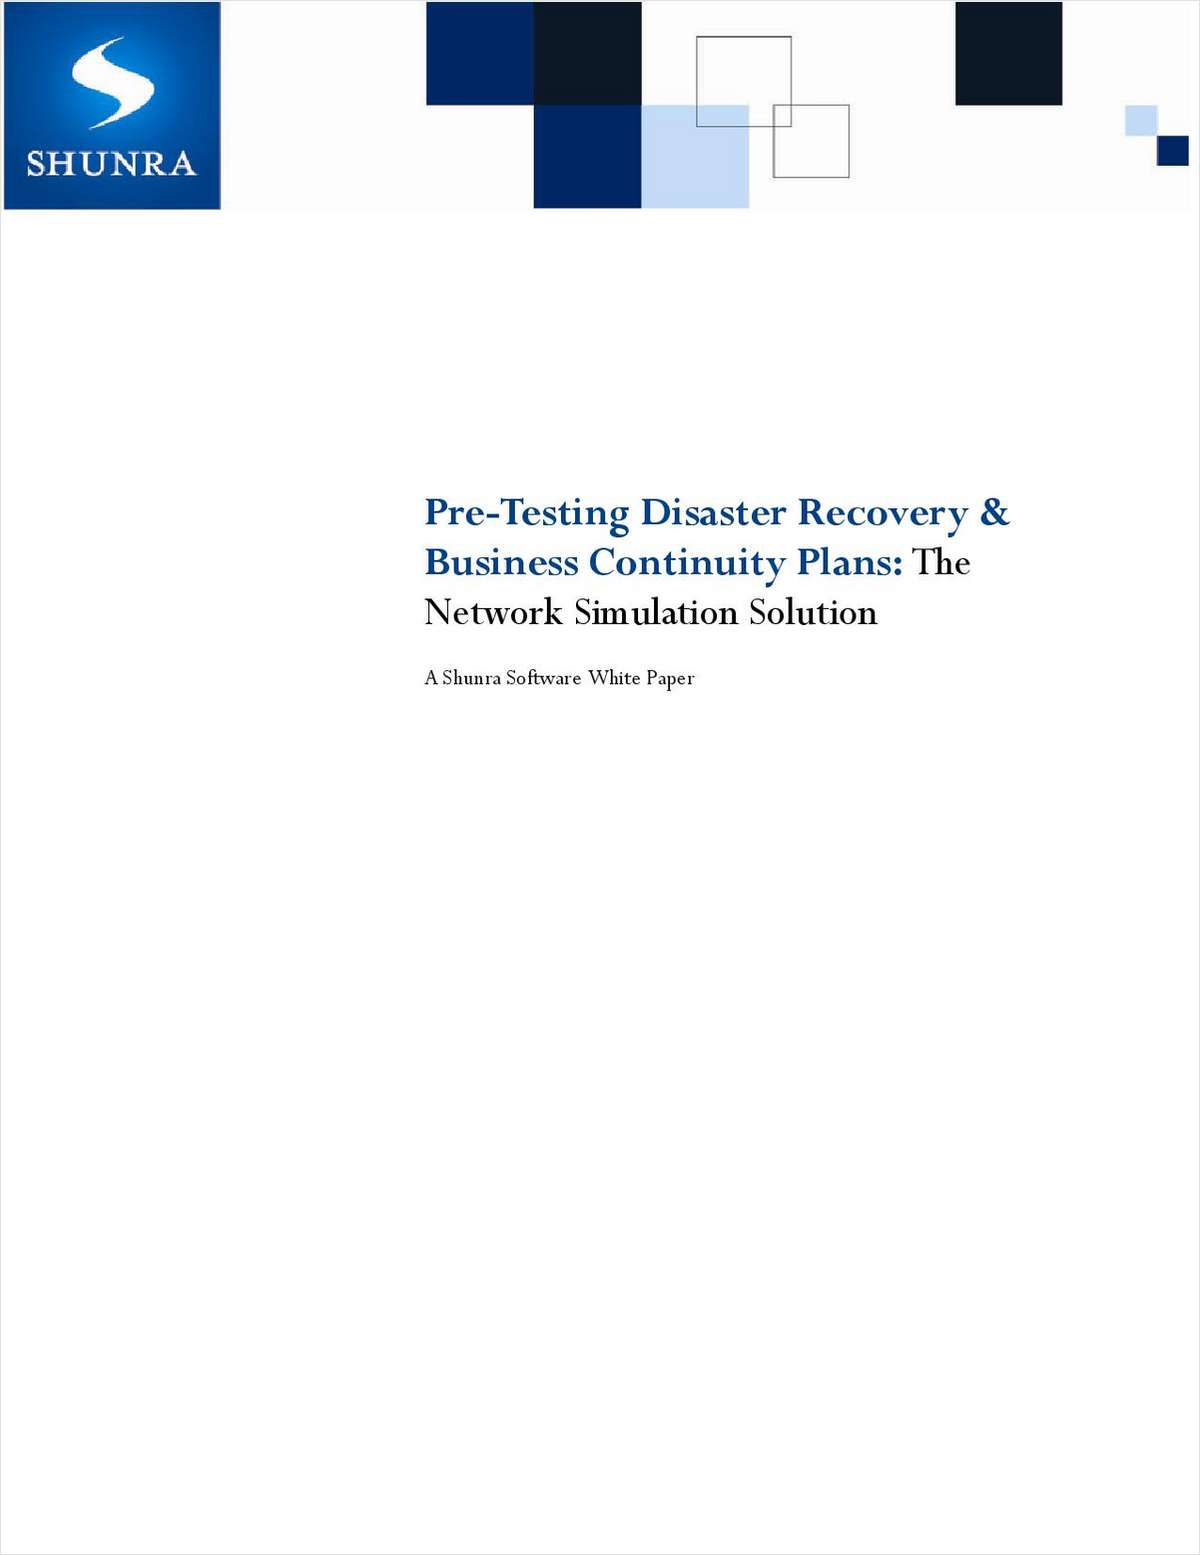 Pre-Testing Disaster Recovery & Business Continuity Plans: The Network Simulation Solution